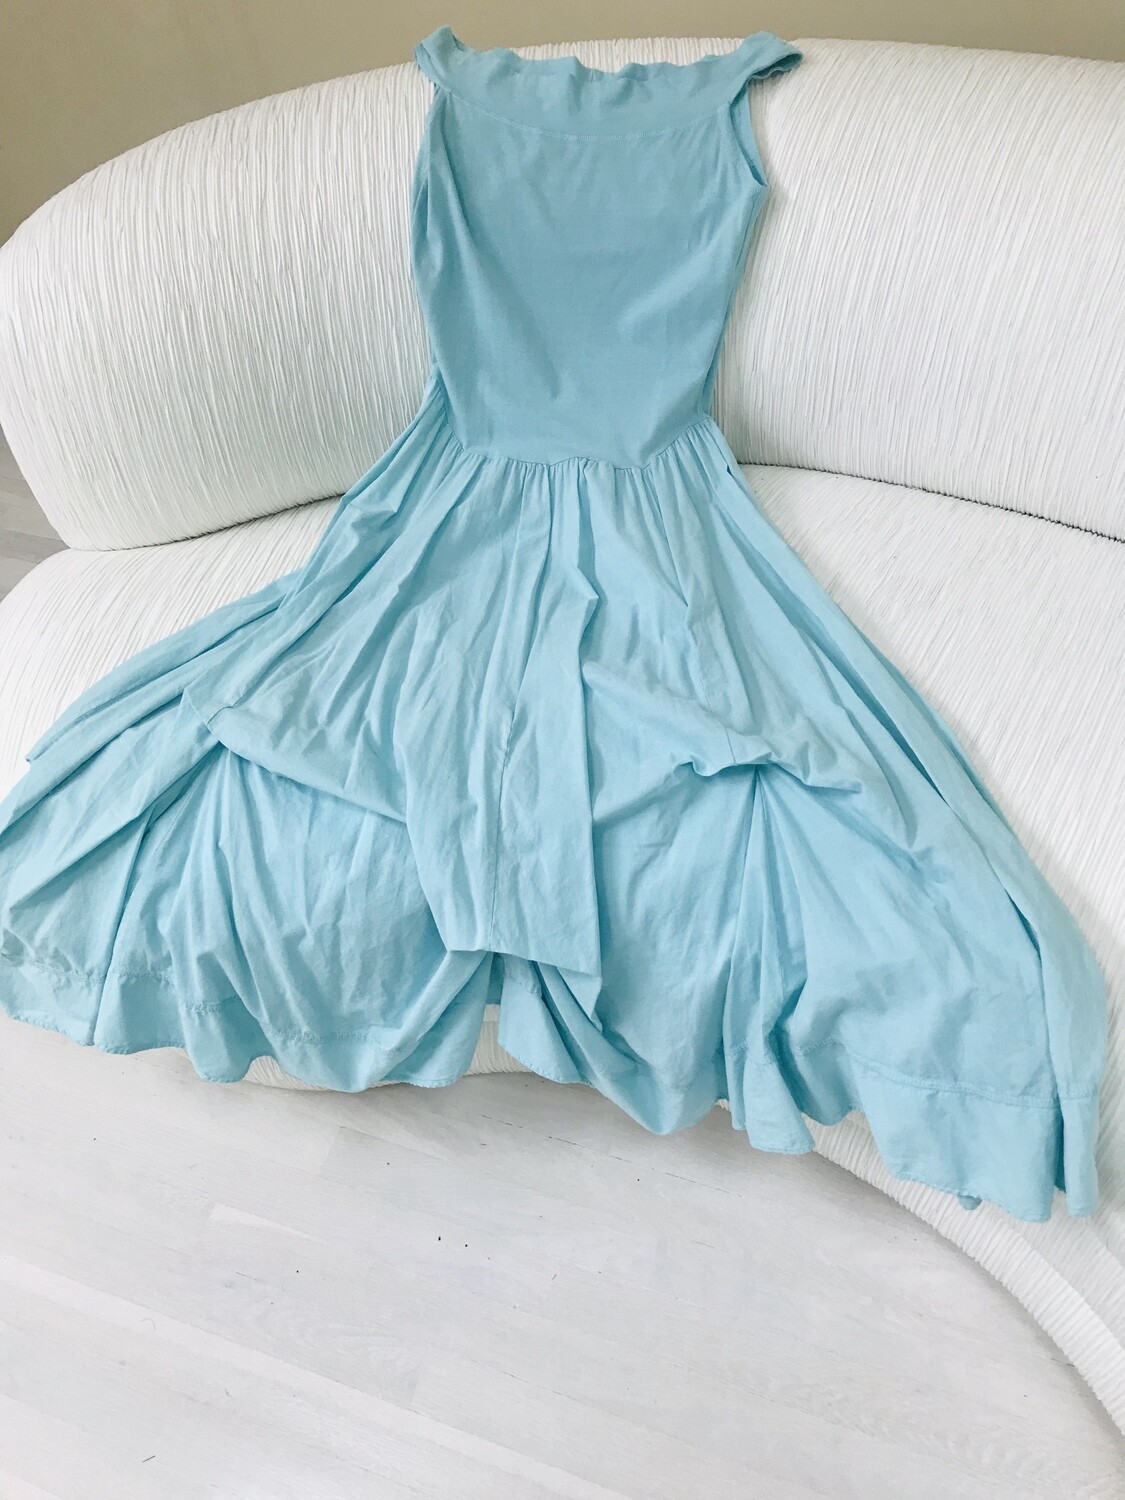 Luna Luz: Sleeveless Tied and Dyed Dress (Ships Immed, 1 Left in Angel Blue!)